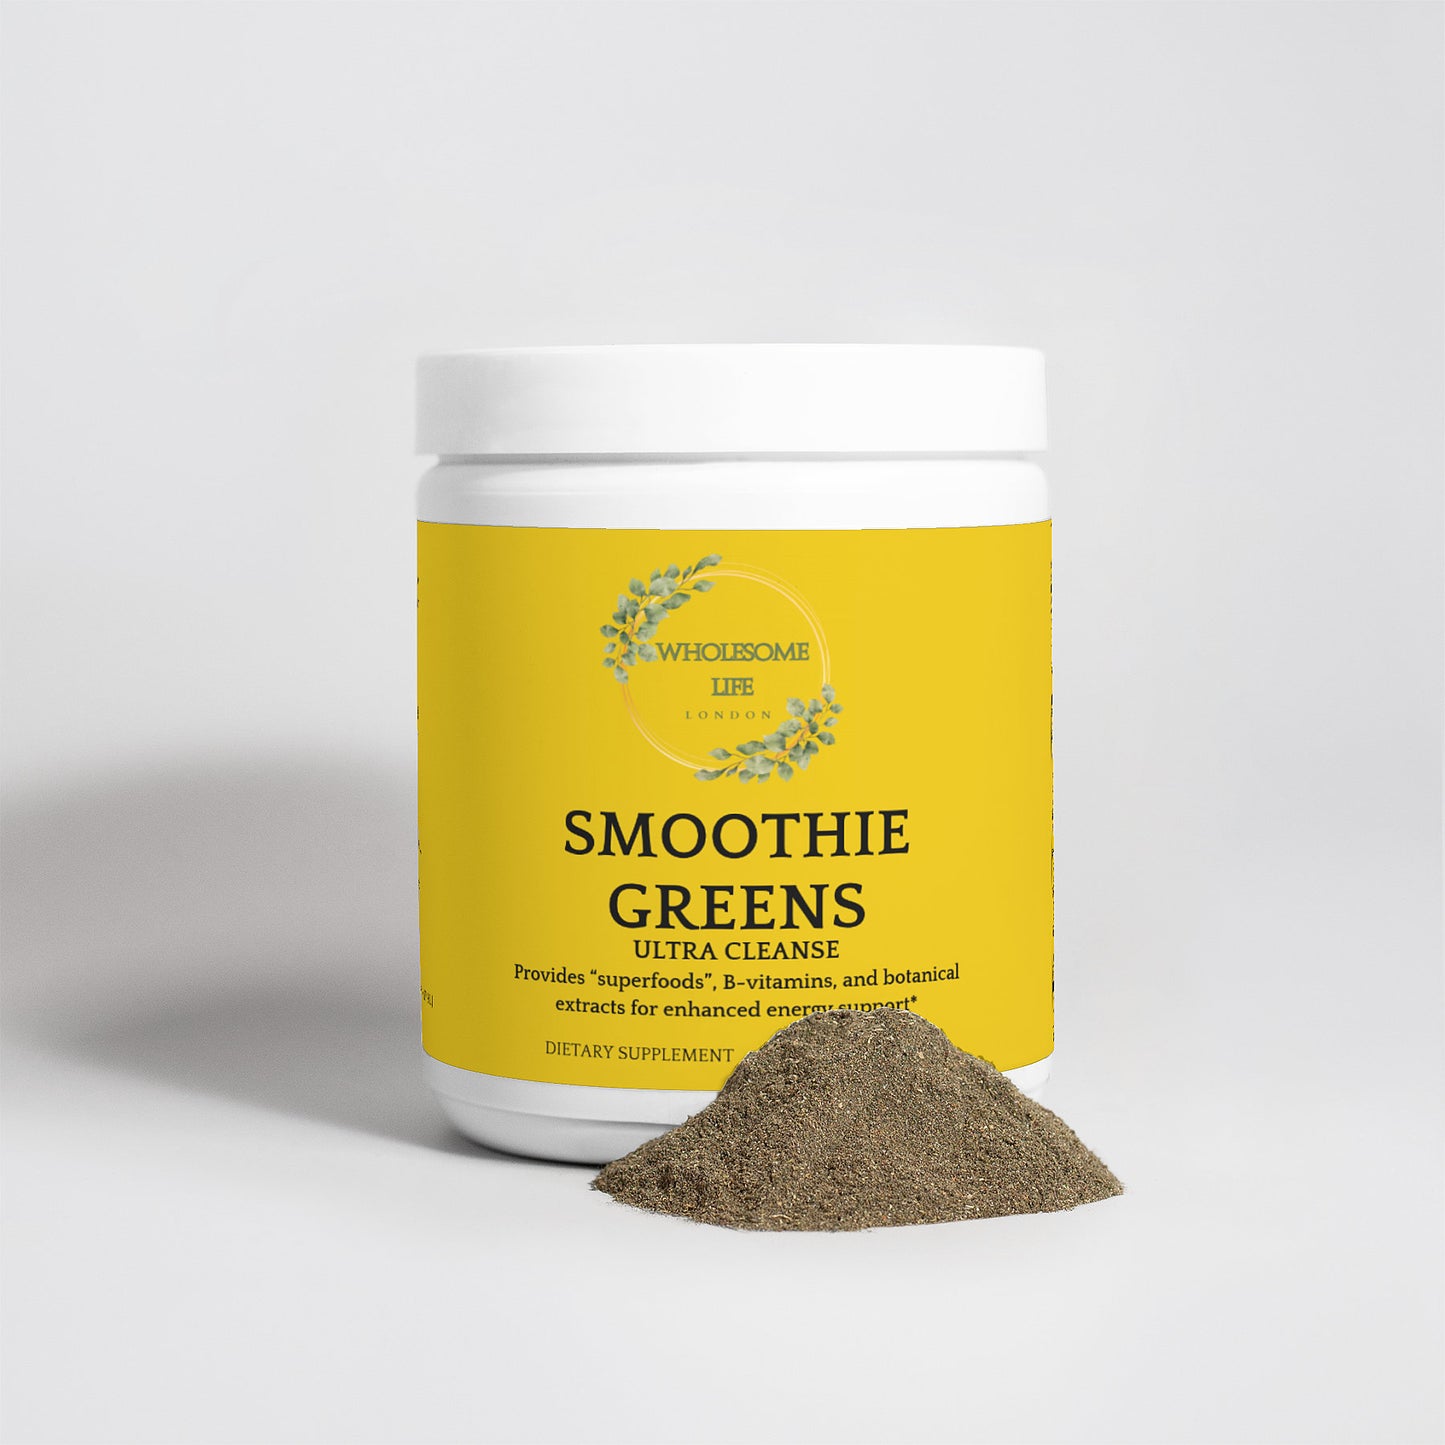 Wholesome Life London Ultra Cleanse Smoothie Greens 8.8 Oz